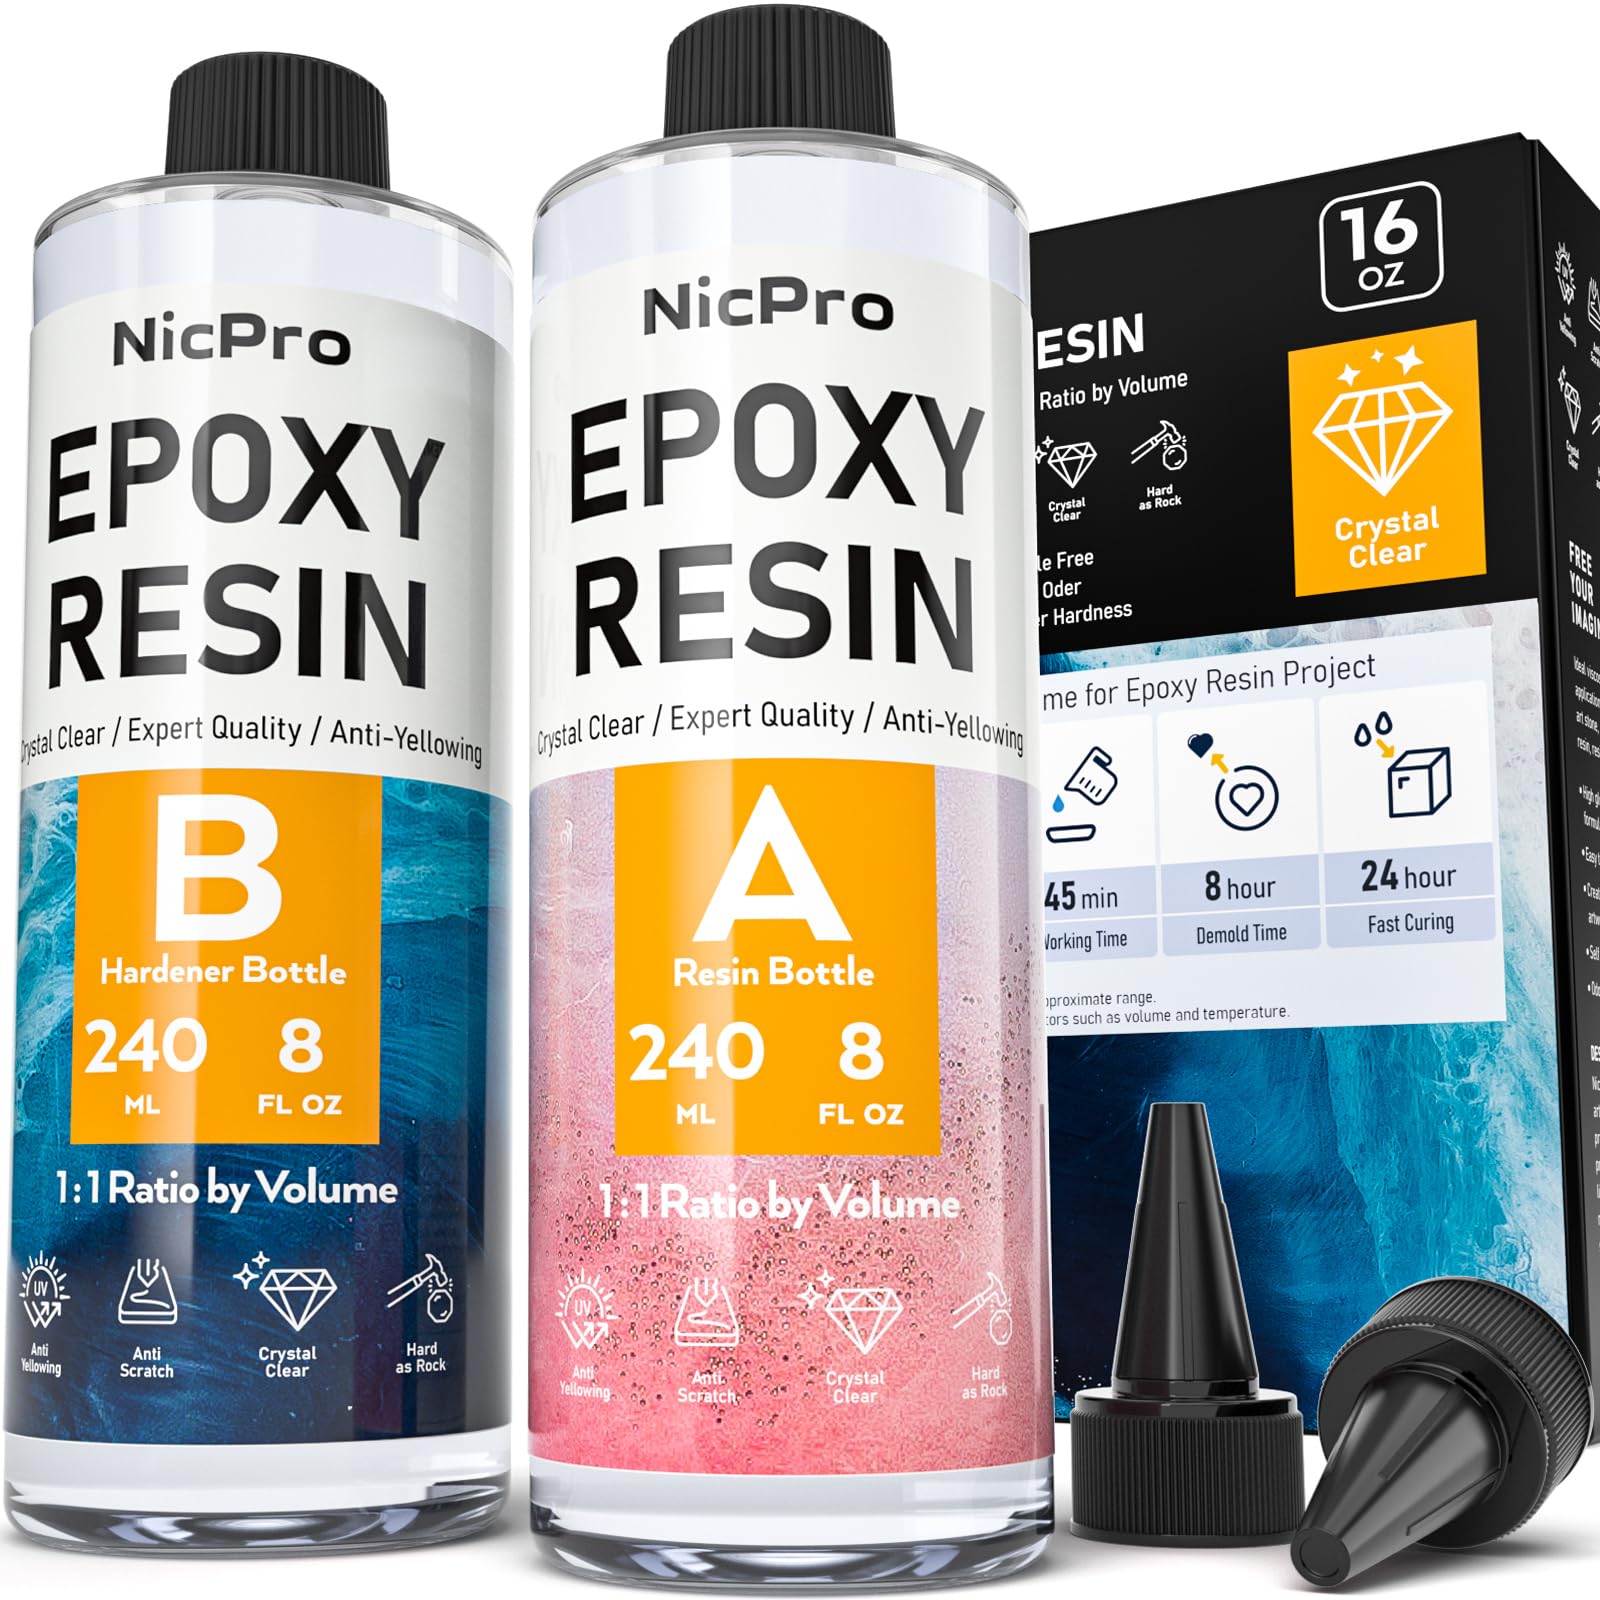 Nicpro 32 Ounce Crystal Clear Epoxy Resin Kit, Food Safe DIY Starter E